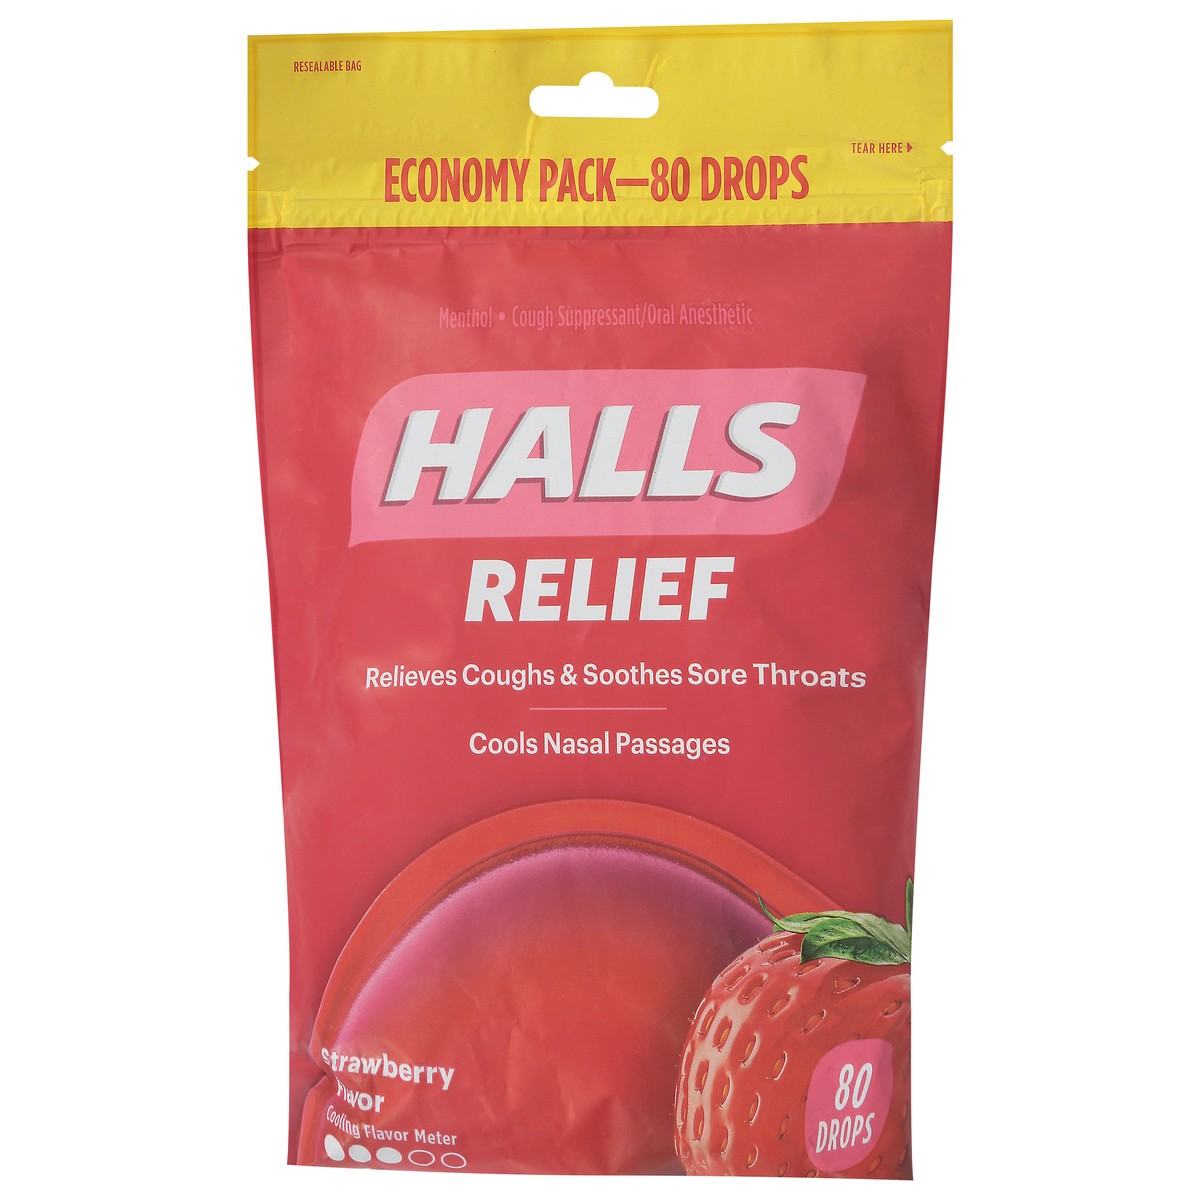 slide 4 of 9, HALLS Relief Strawberry Cough Drops, Economy Pack, 80 Drops, 8.75 oz